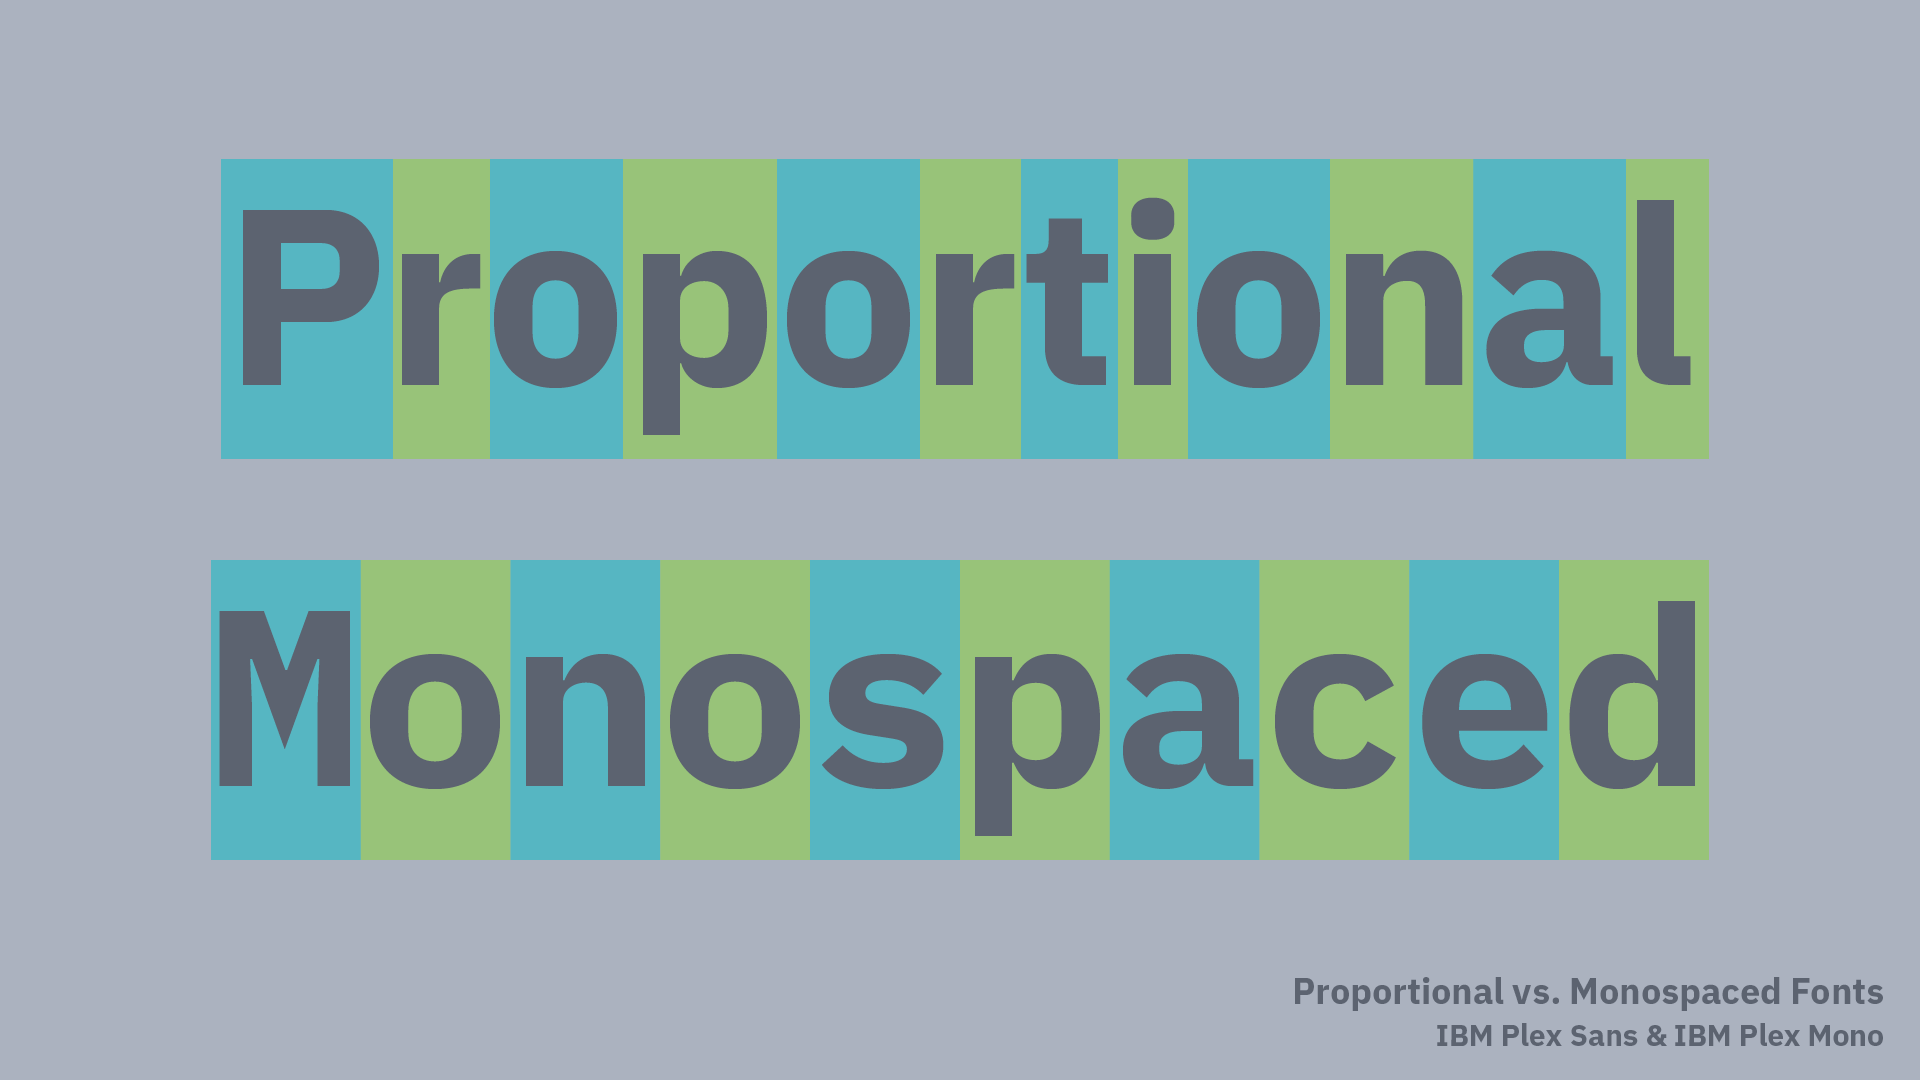 The visual and spacing differences between proportional and monospaced fonts